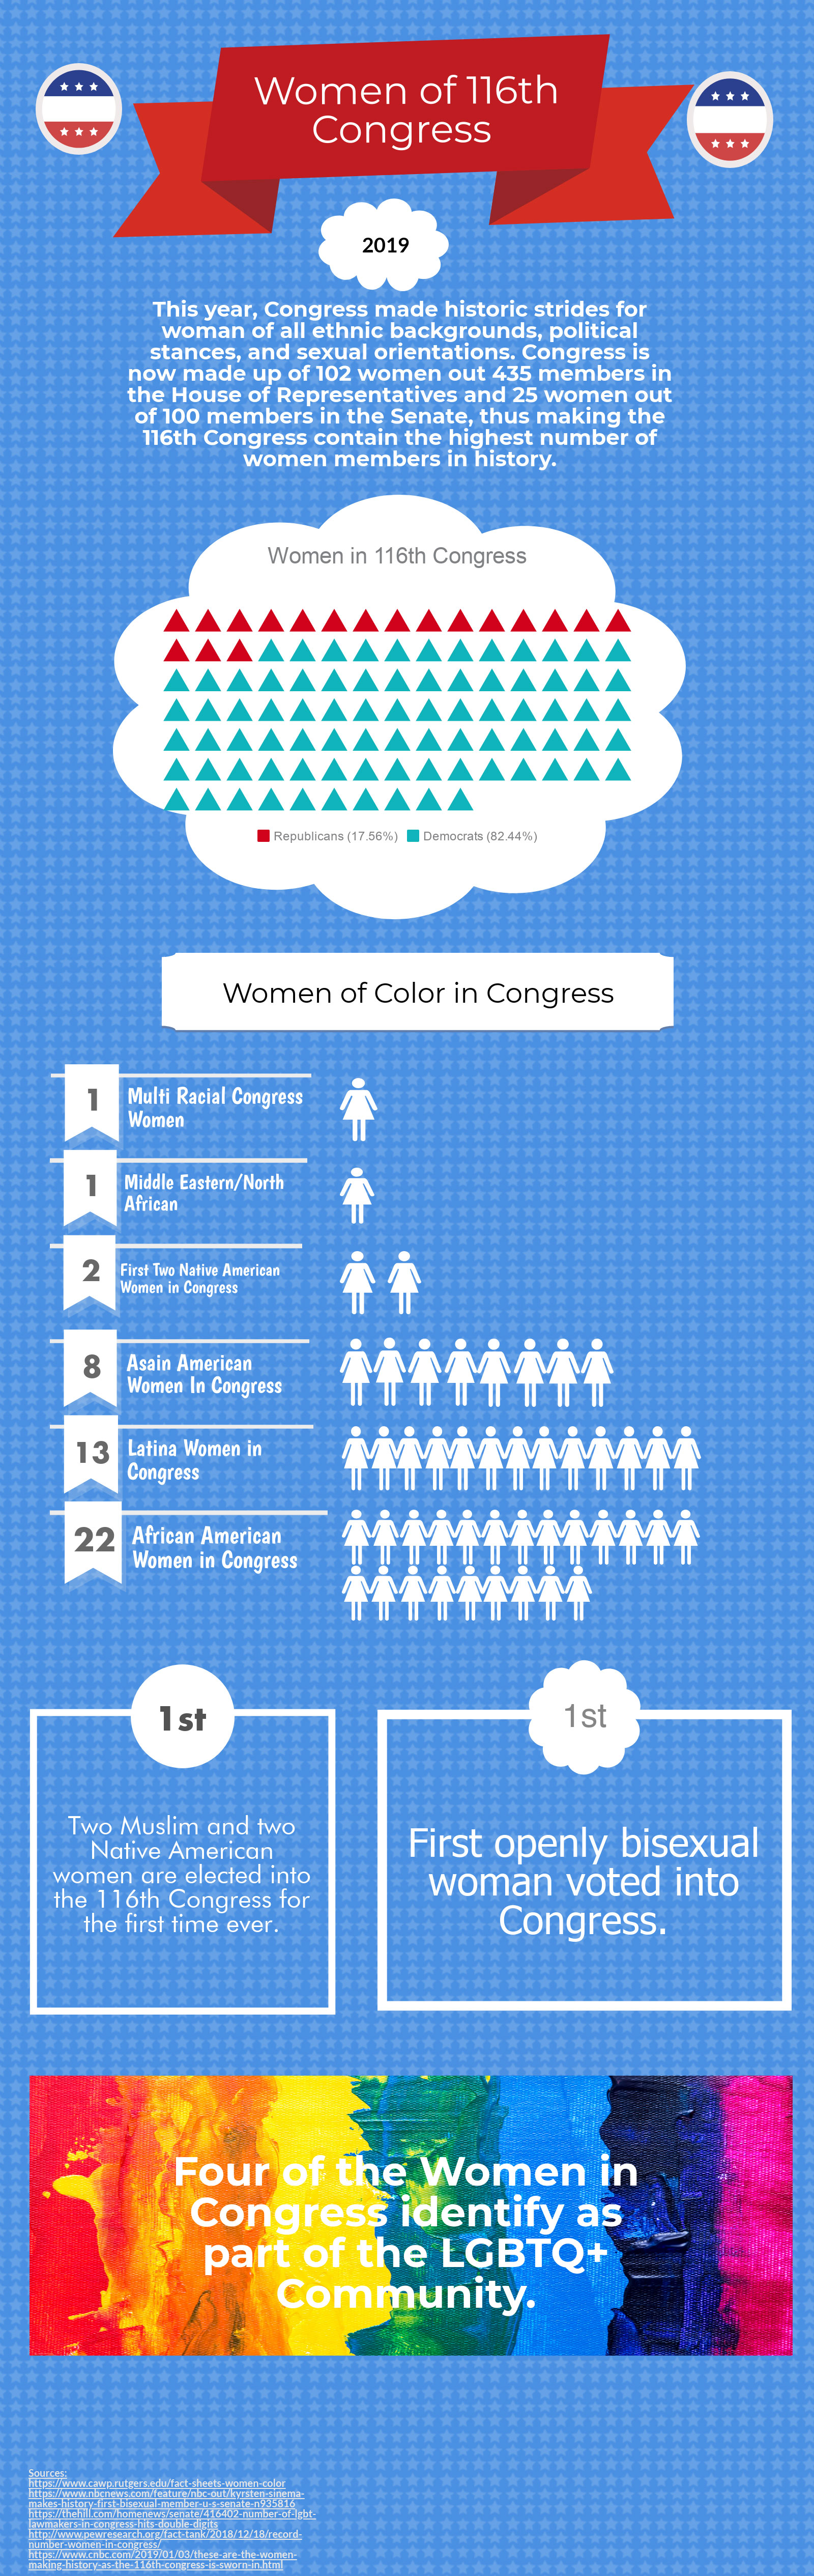 GRAPHIC: Visual of the statistics of diversification between the women members of the 116th Congress. 